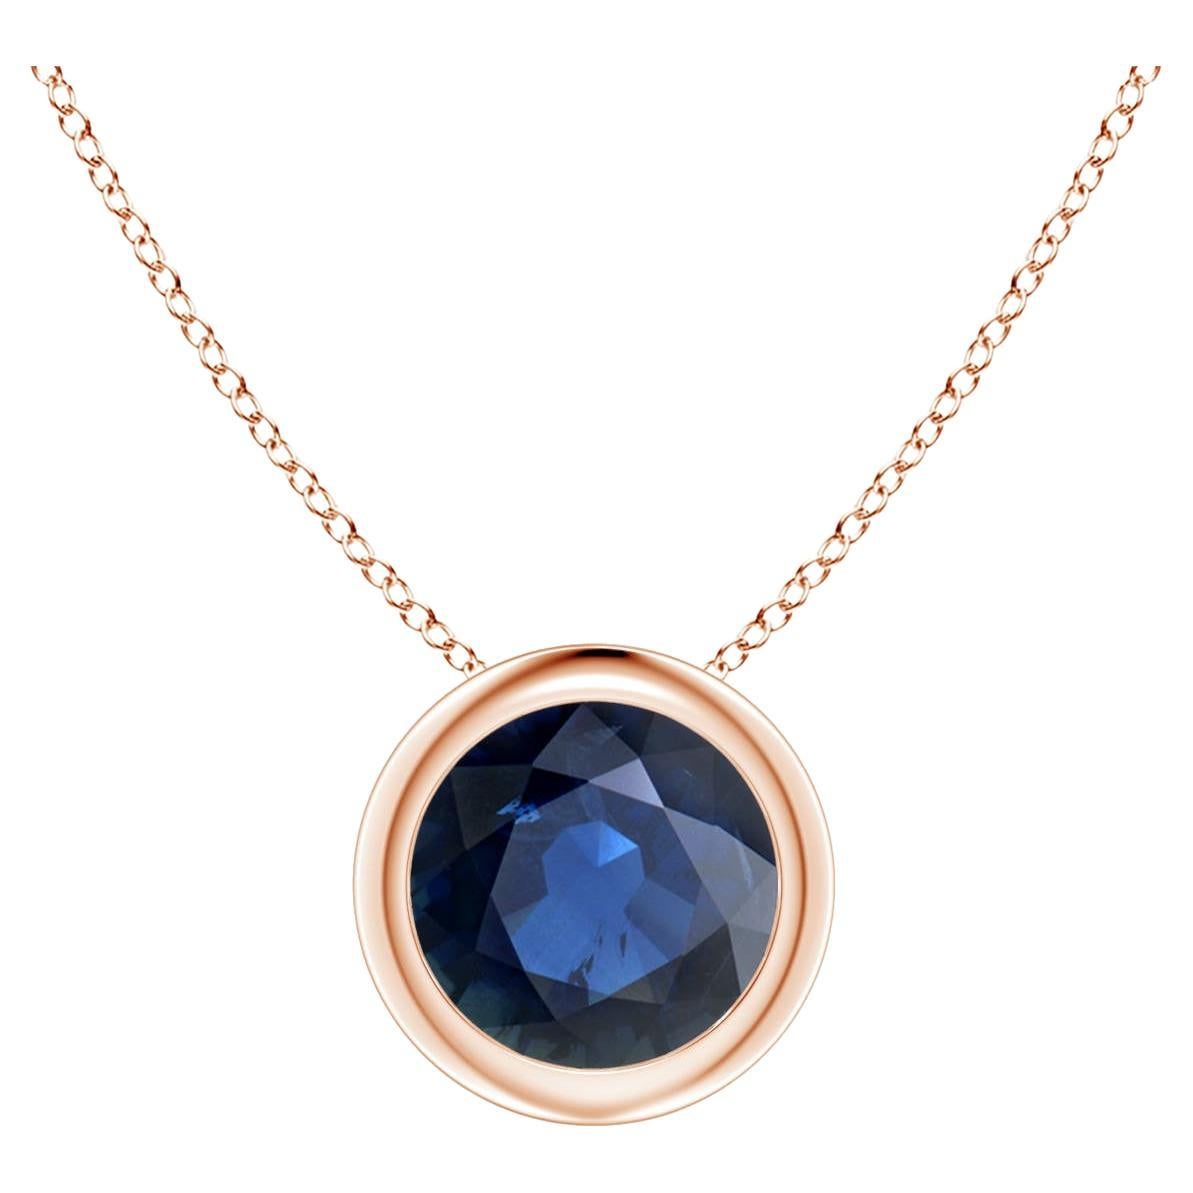 Natural Round 1 ct Blue Sapphire Solitaire 6mm Pendant in 14K Rose Gold